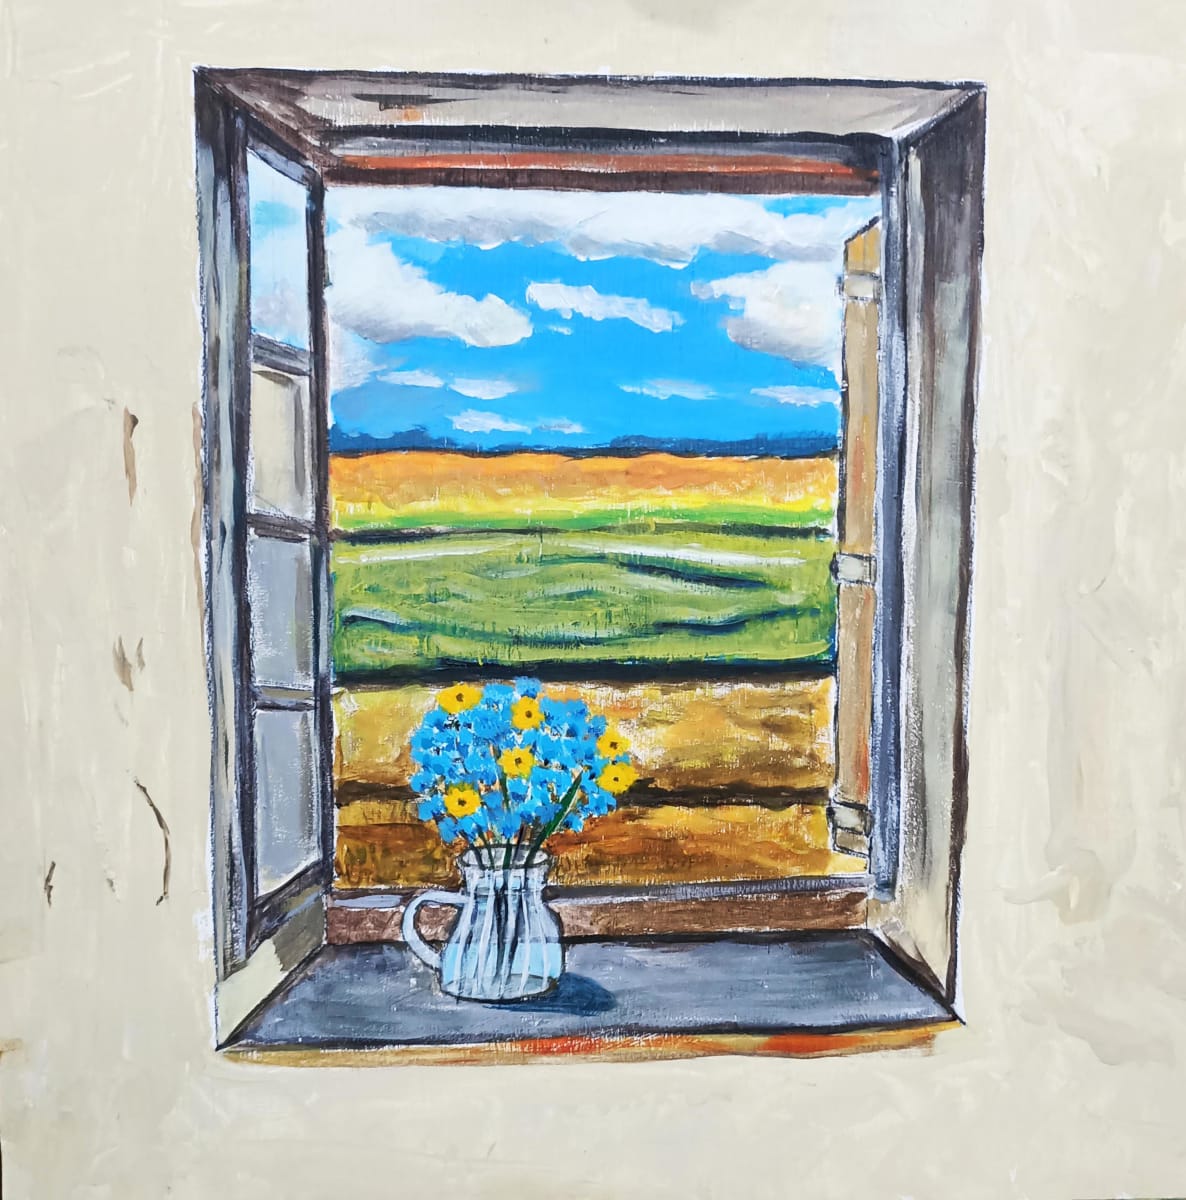 STILL LIFE WITH FLOWERS by Linda Leftwich  Image: Still life with a view